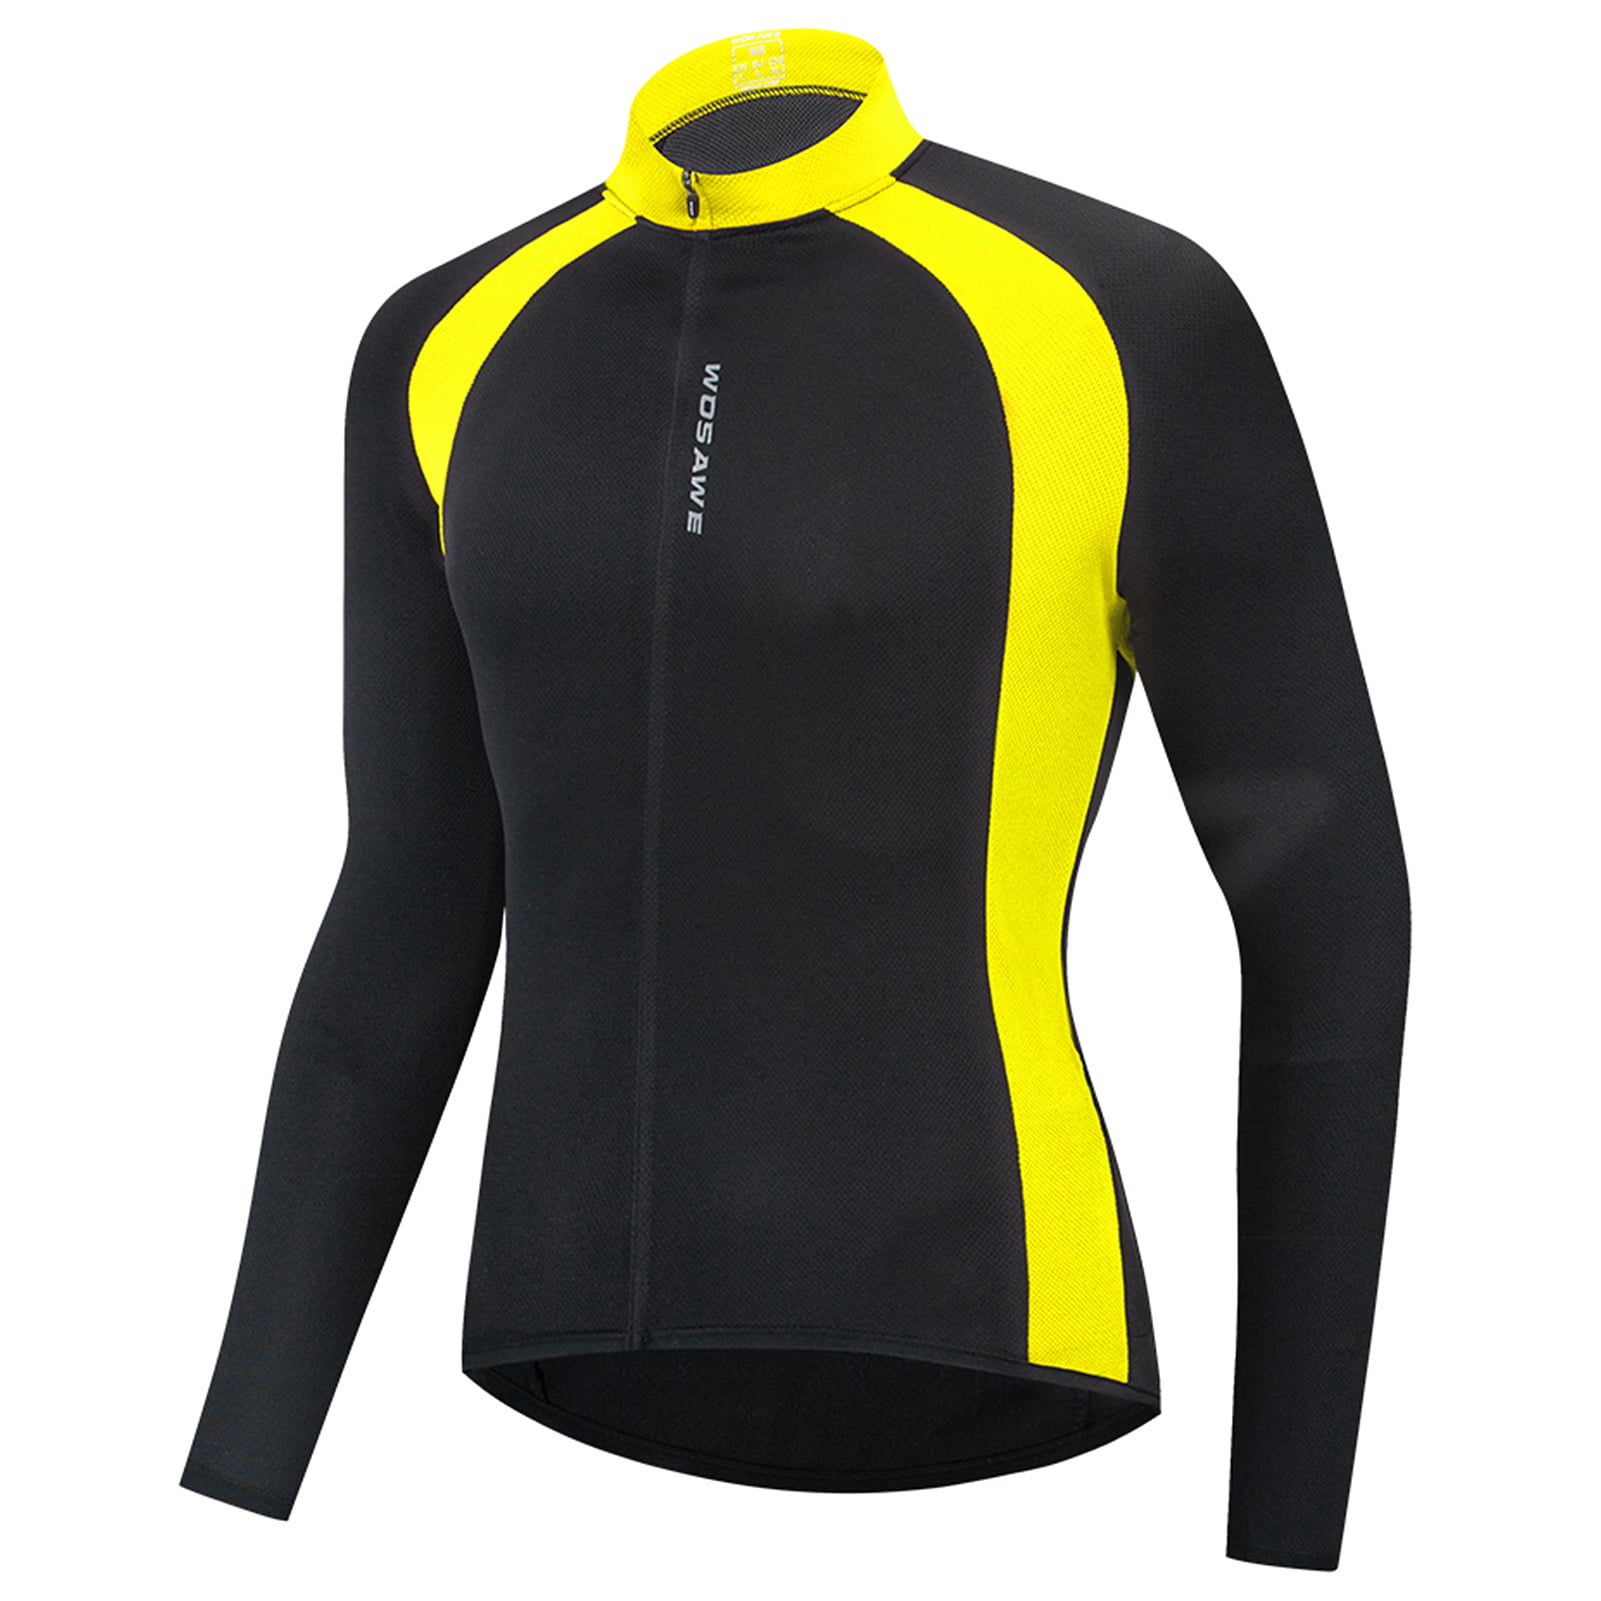 Details about   Outdoor Bike Riding Cycling Jerseys Sports Bicycle Men Breathable Shirt M L XL 